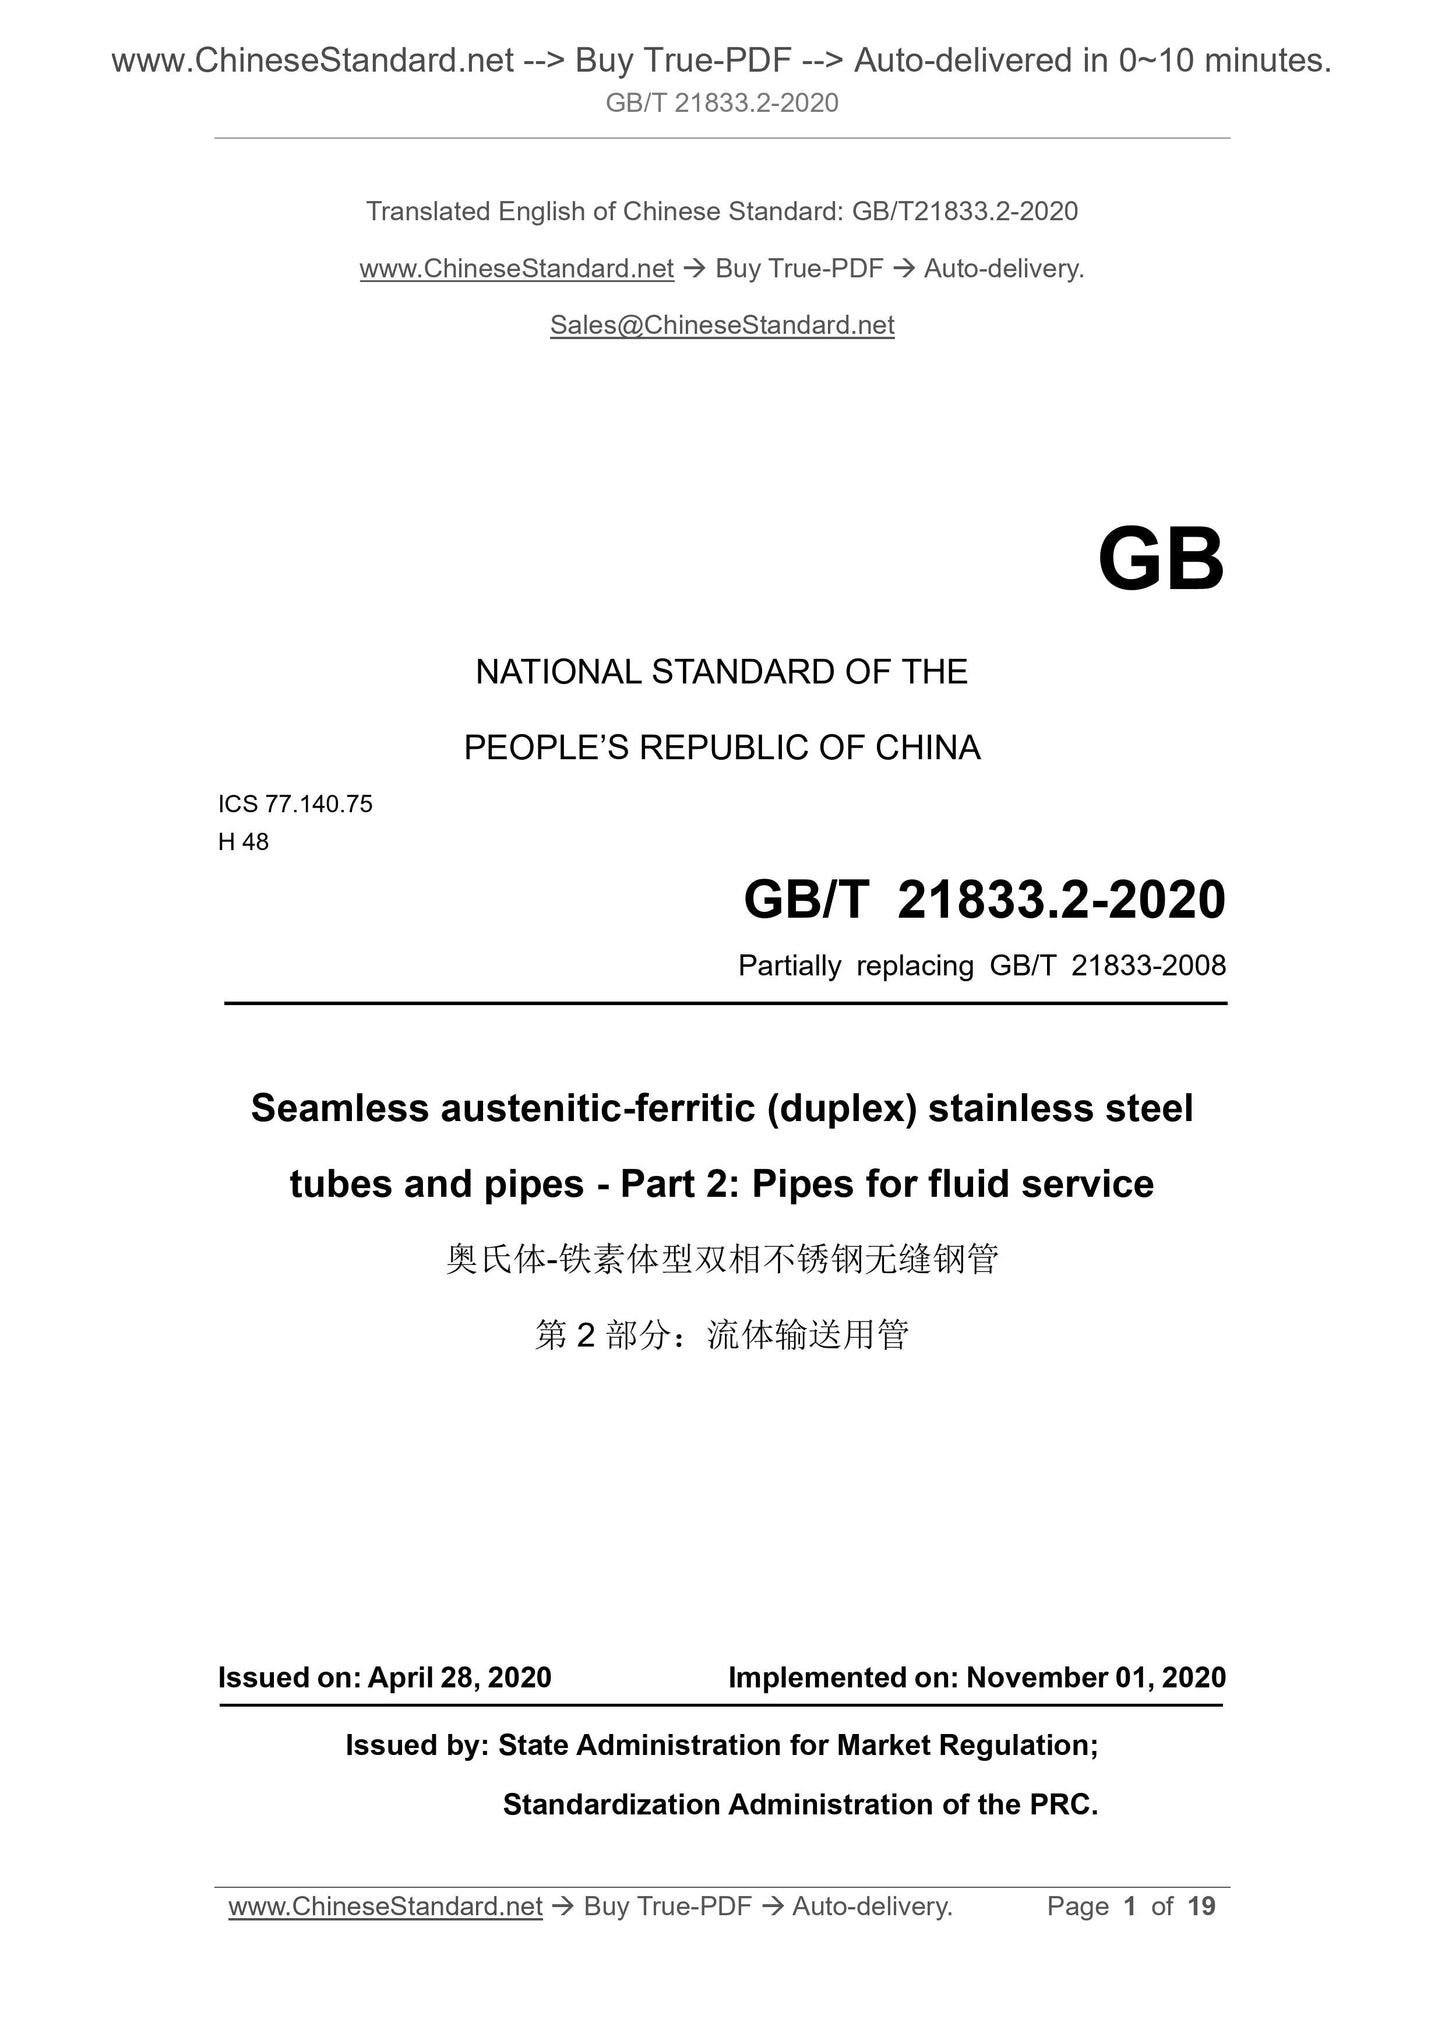 GB/T 21833.2-2020 Page 1